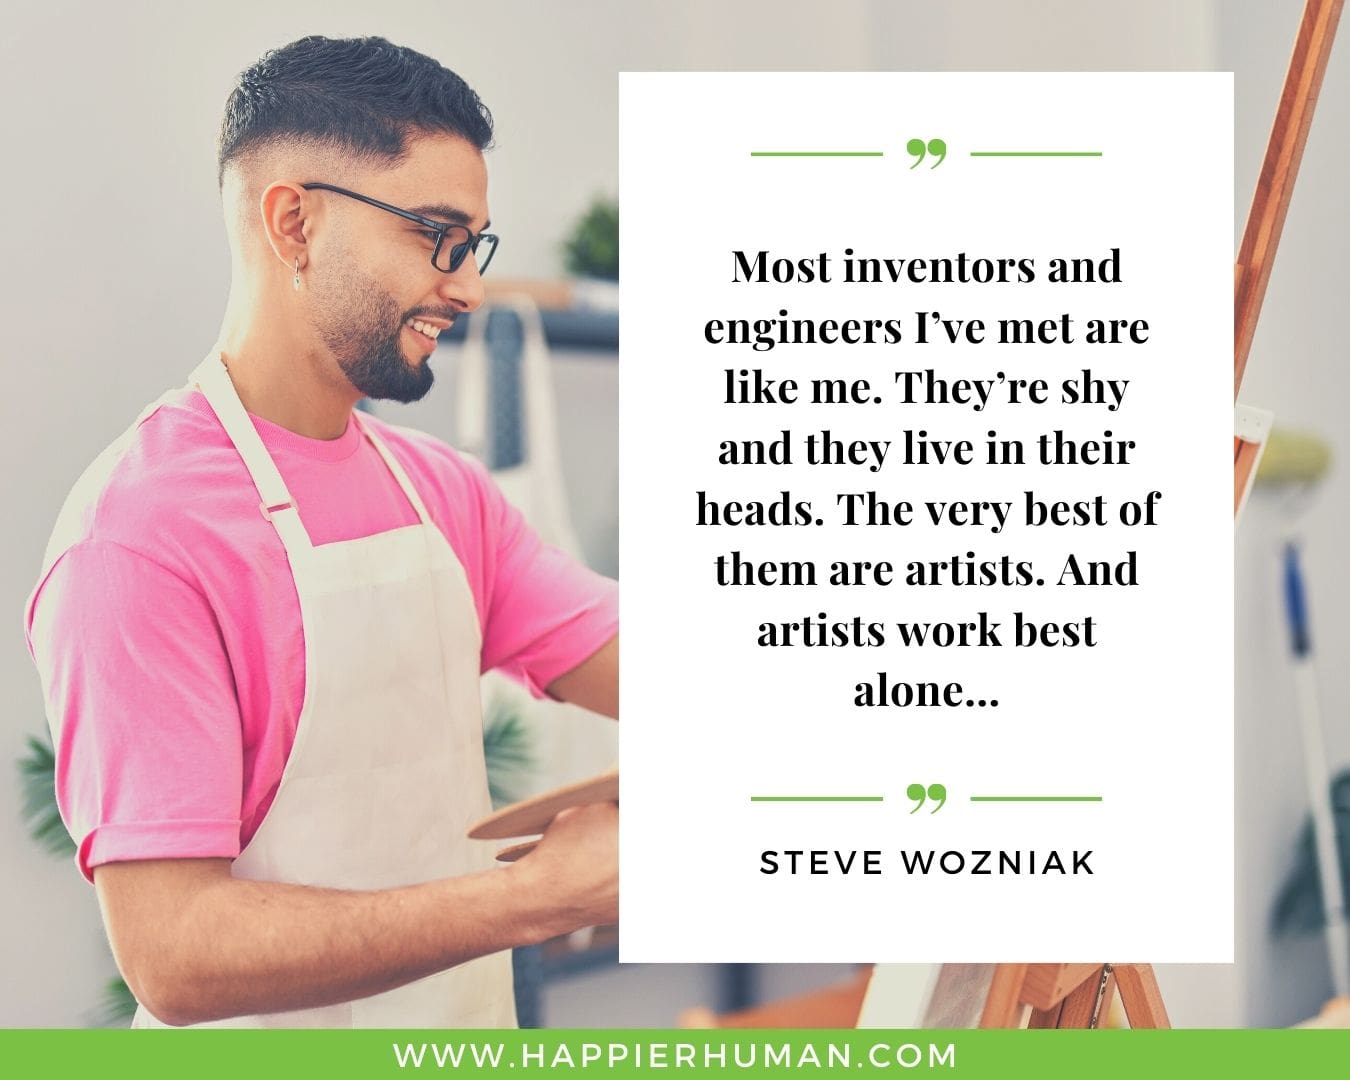 Introvert Quotes - “Most inventors and engineers I’ve met are like me. They’re shy and they live in their heads. The very best of them are artists. And artists work best alone…” – Steve Wozniak